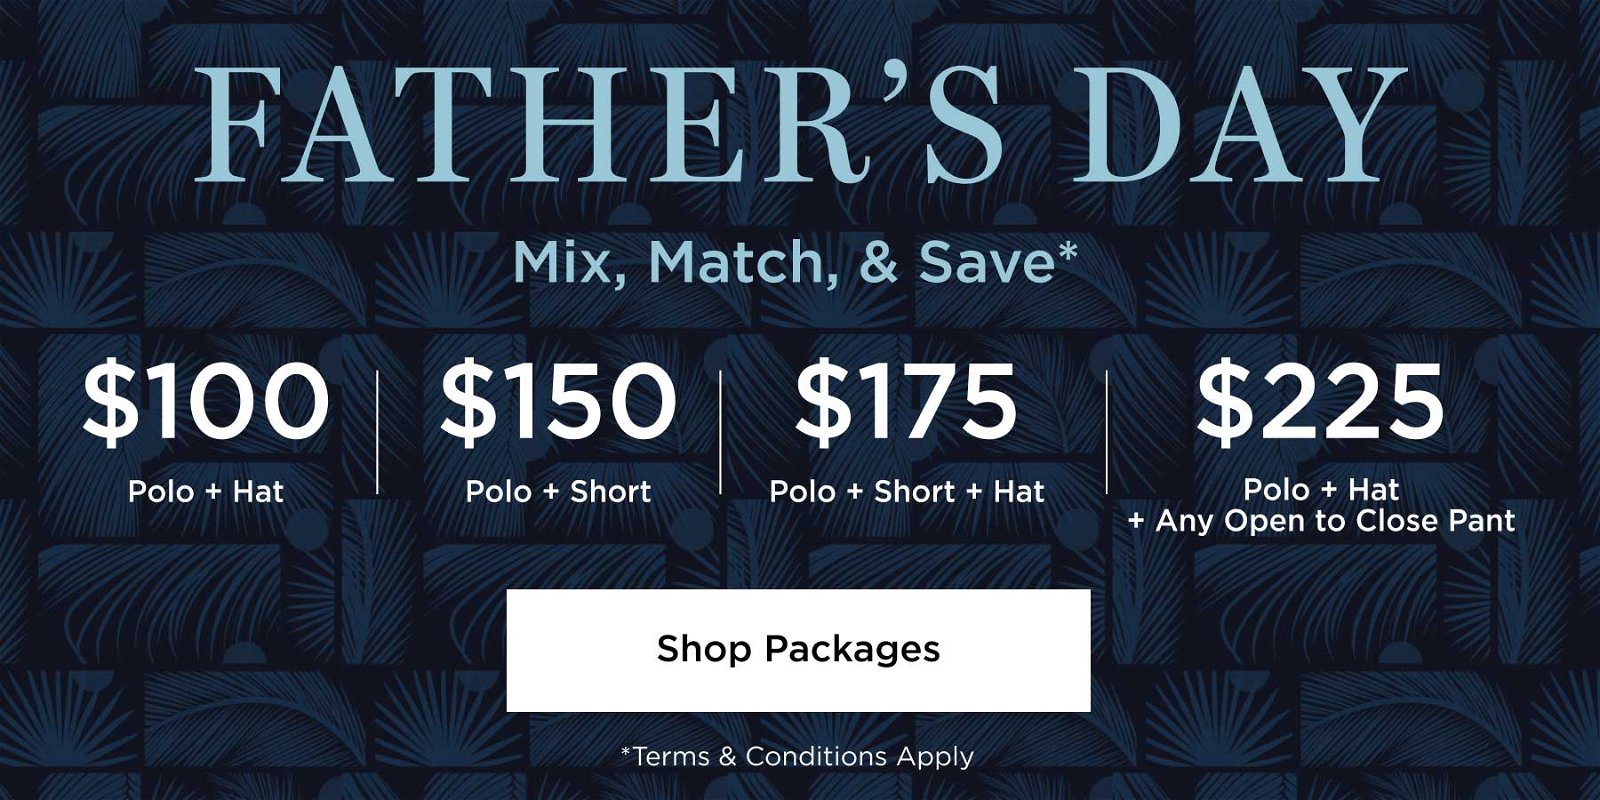 Father's Day Mix, Match, & Save*